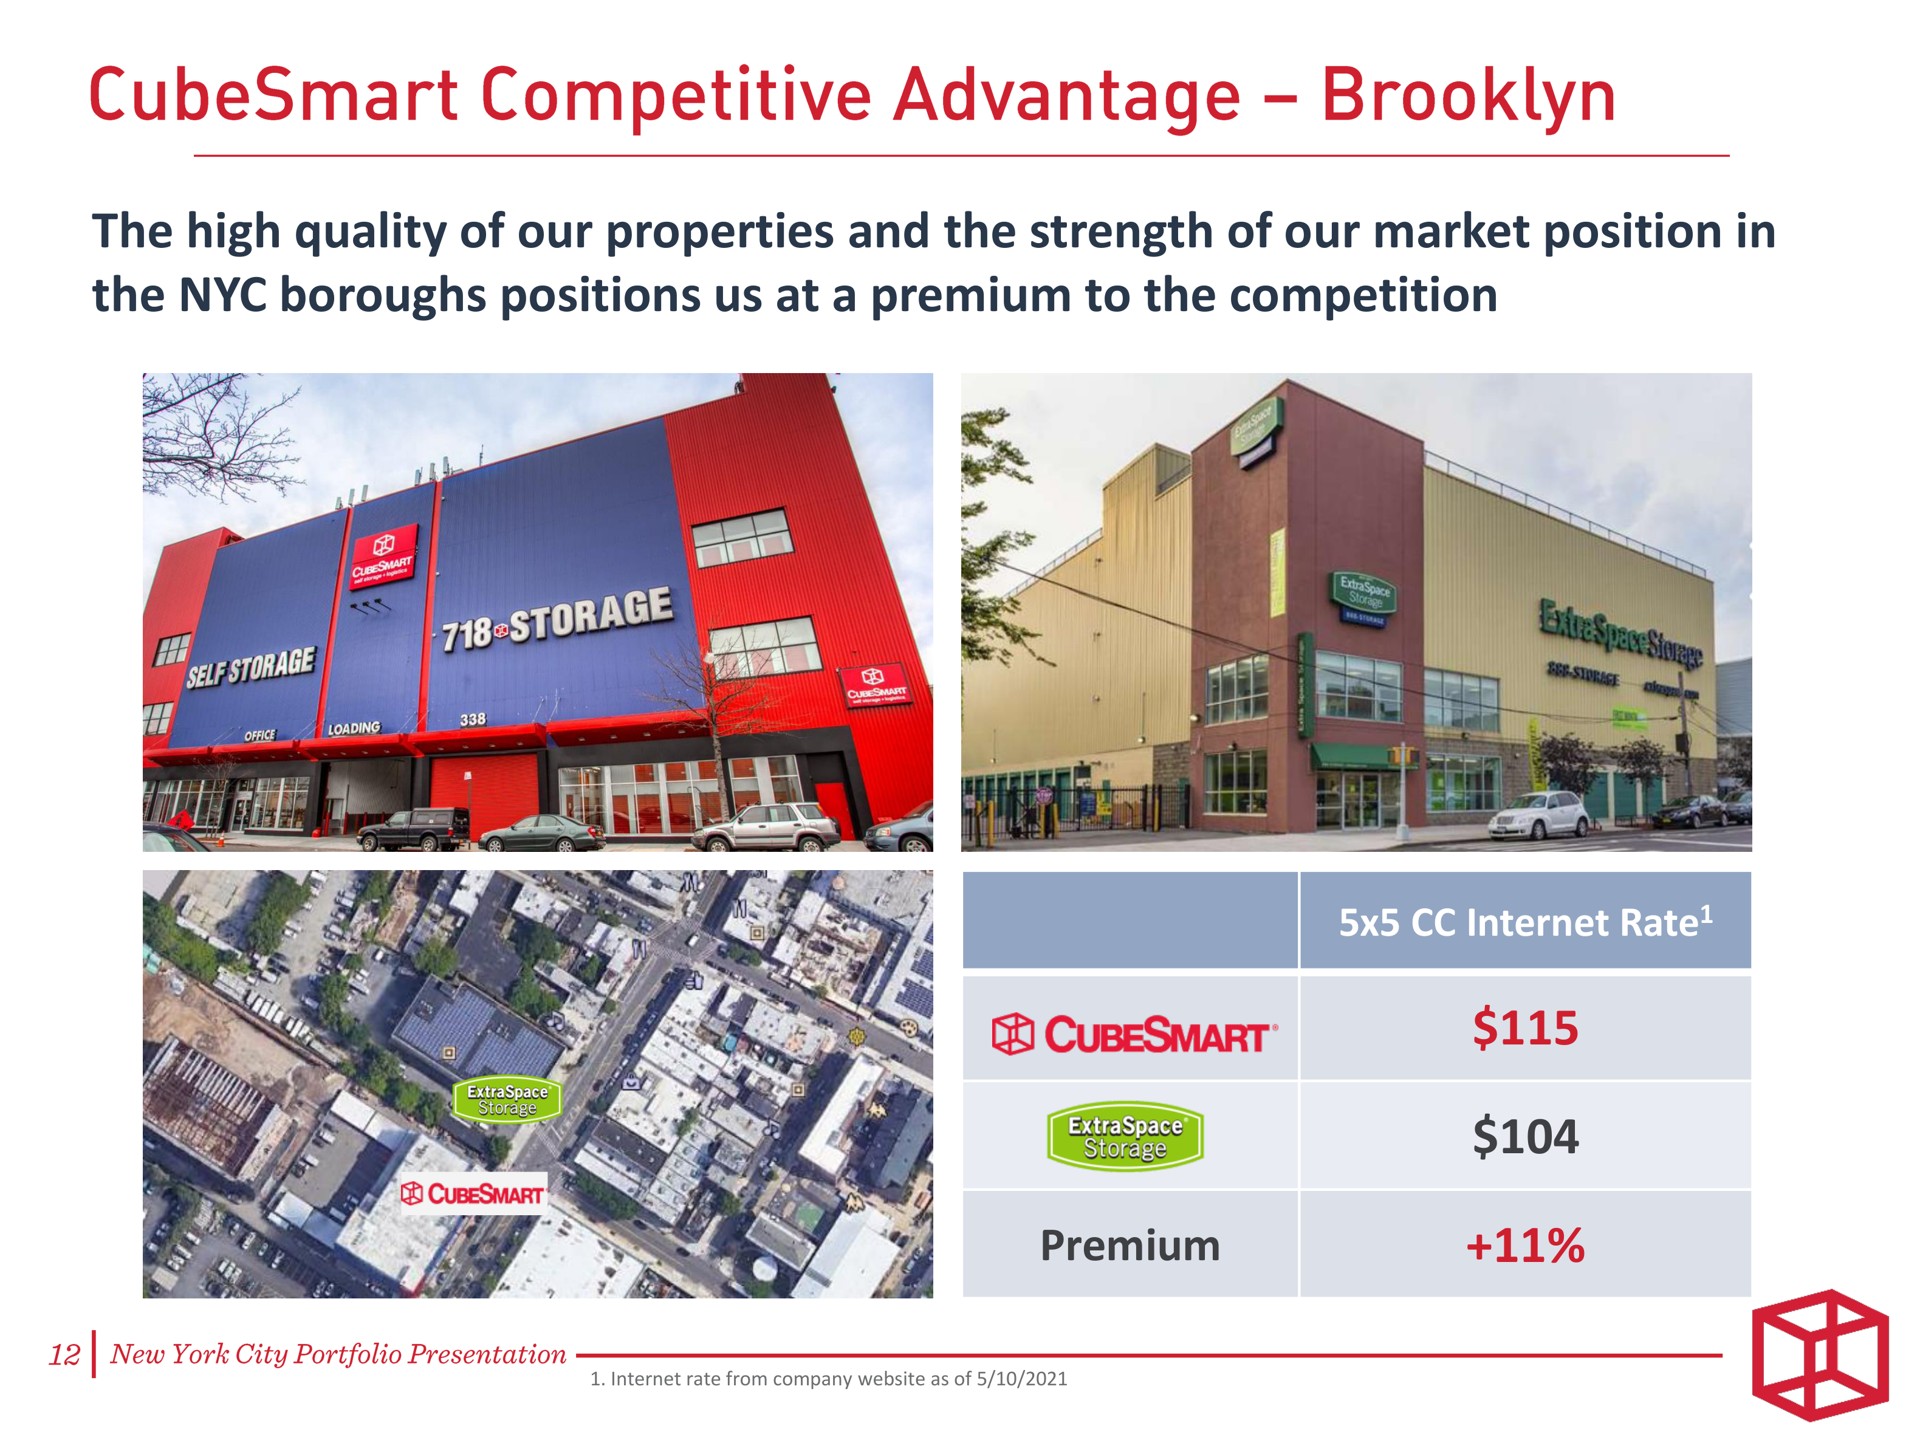 the high quality of our properties and the strength of our market position in the boroughs positions us at a premium to the competition competitive advantage | CubeSmart